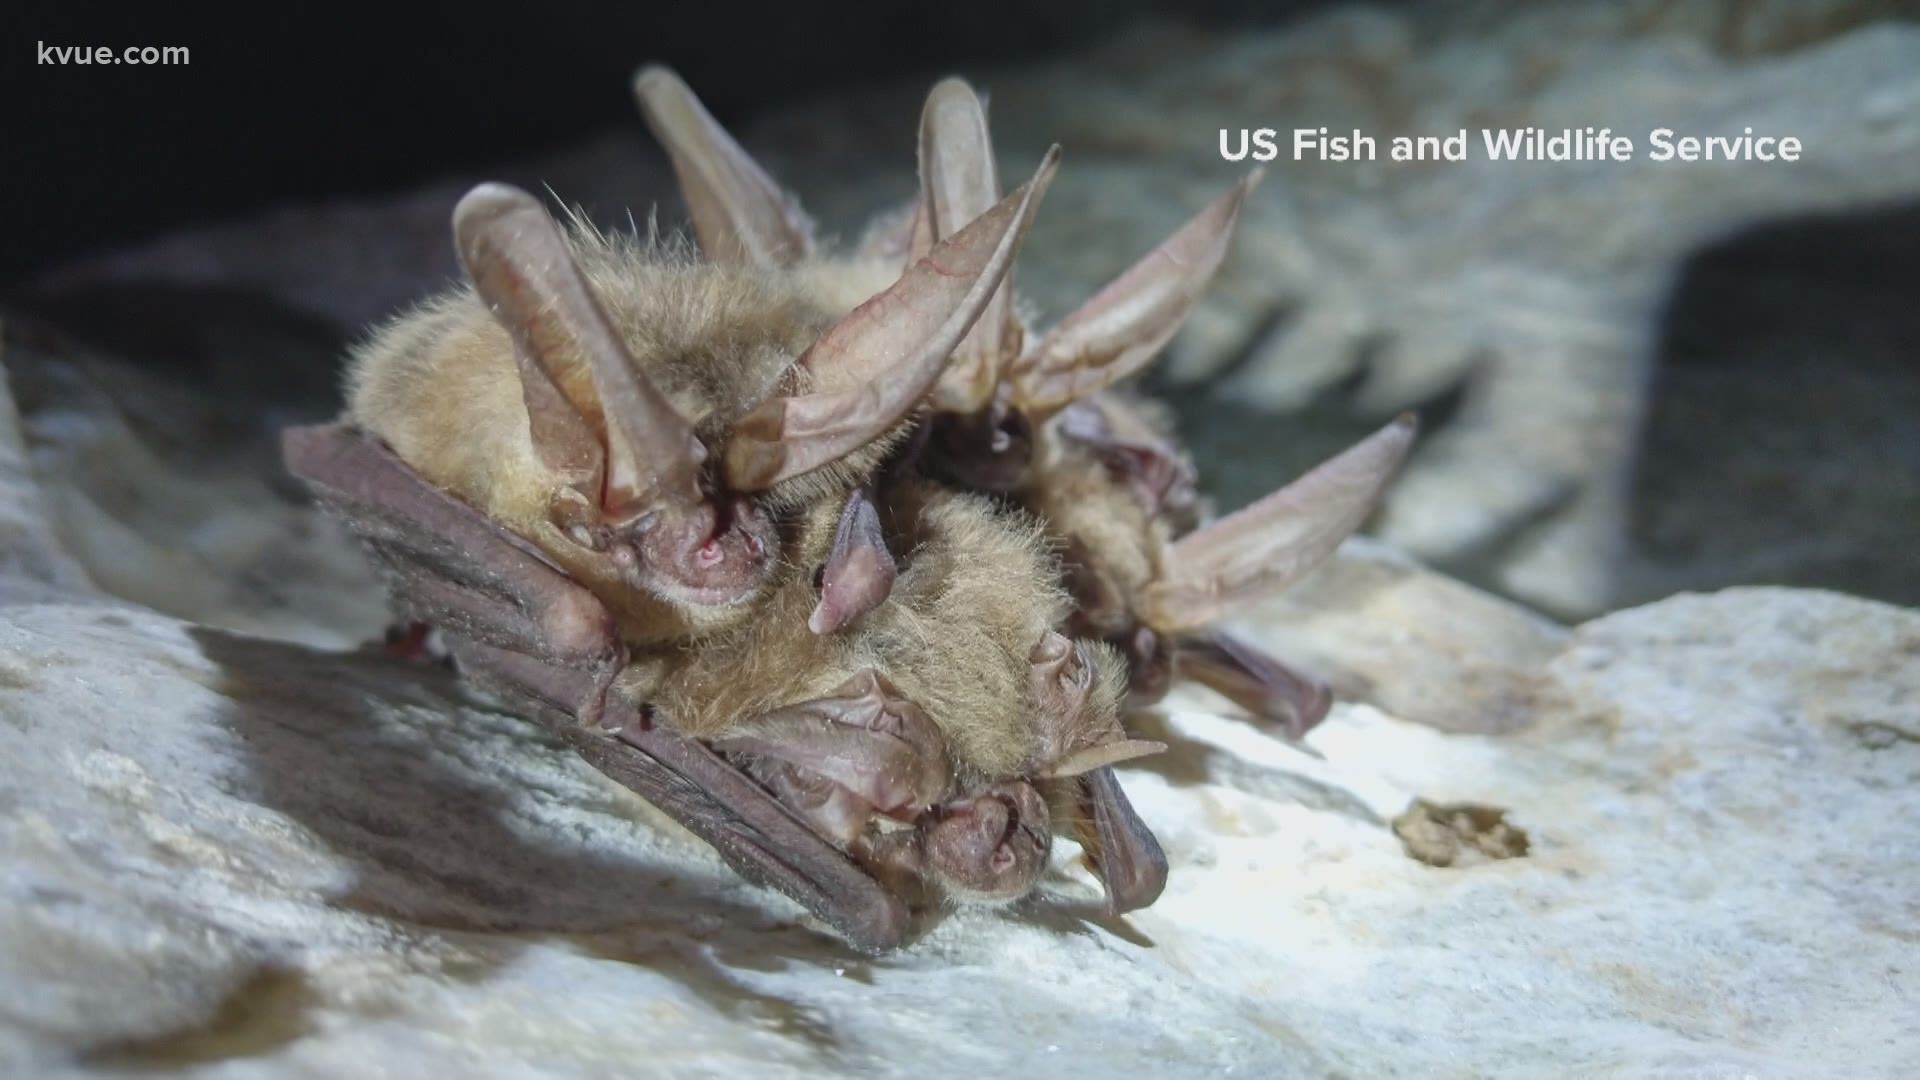 White nose syndrome has already killed millions of bats nationwide. Now scientists hope to save bats from the fungus.